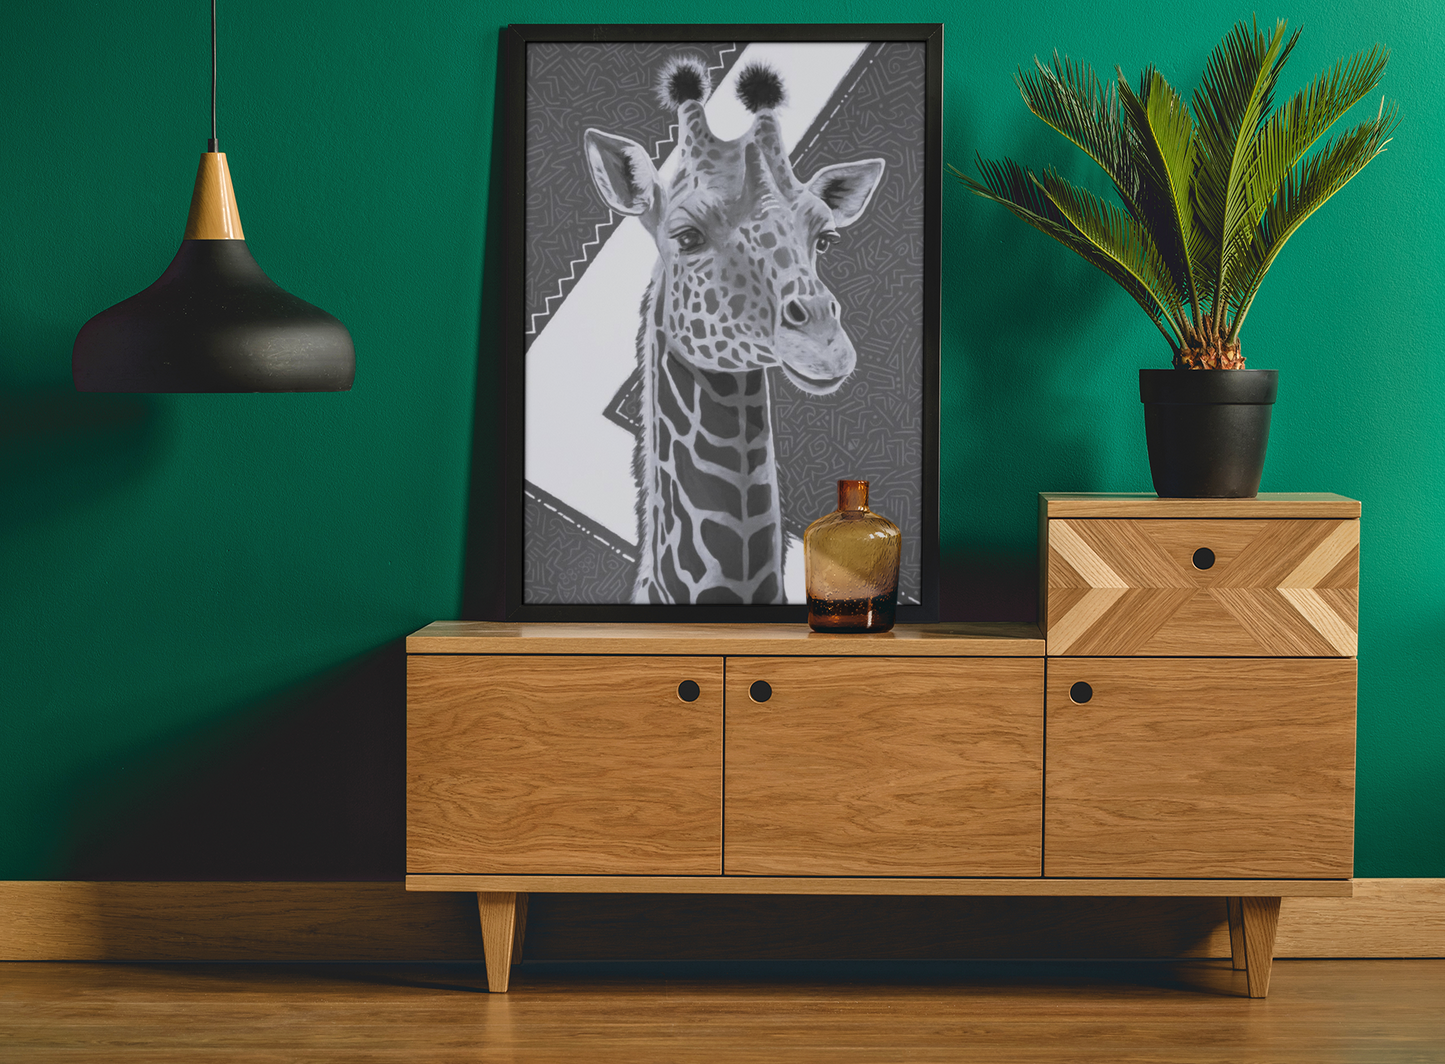 Black and White Canvas print of an original acrylic painting with gold leaf, of a majestic giraffe, with geometric background, leaning against a wall on a credenza next to a plant and lamp